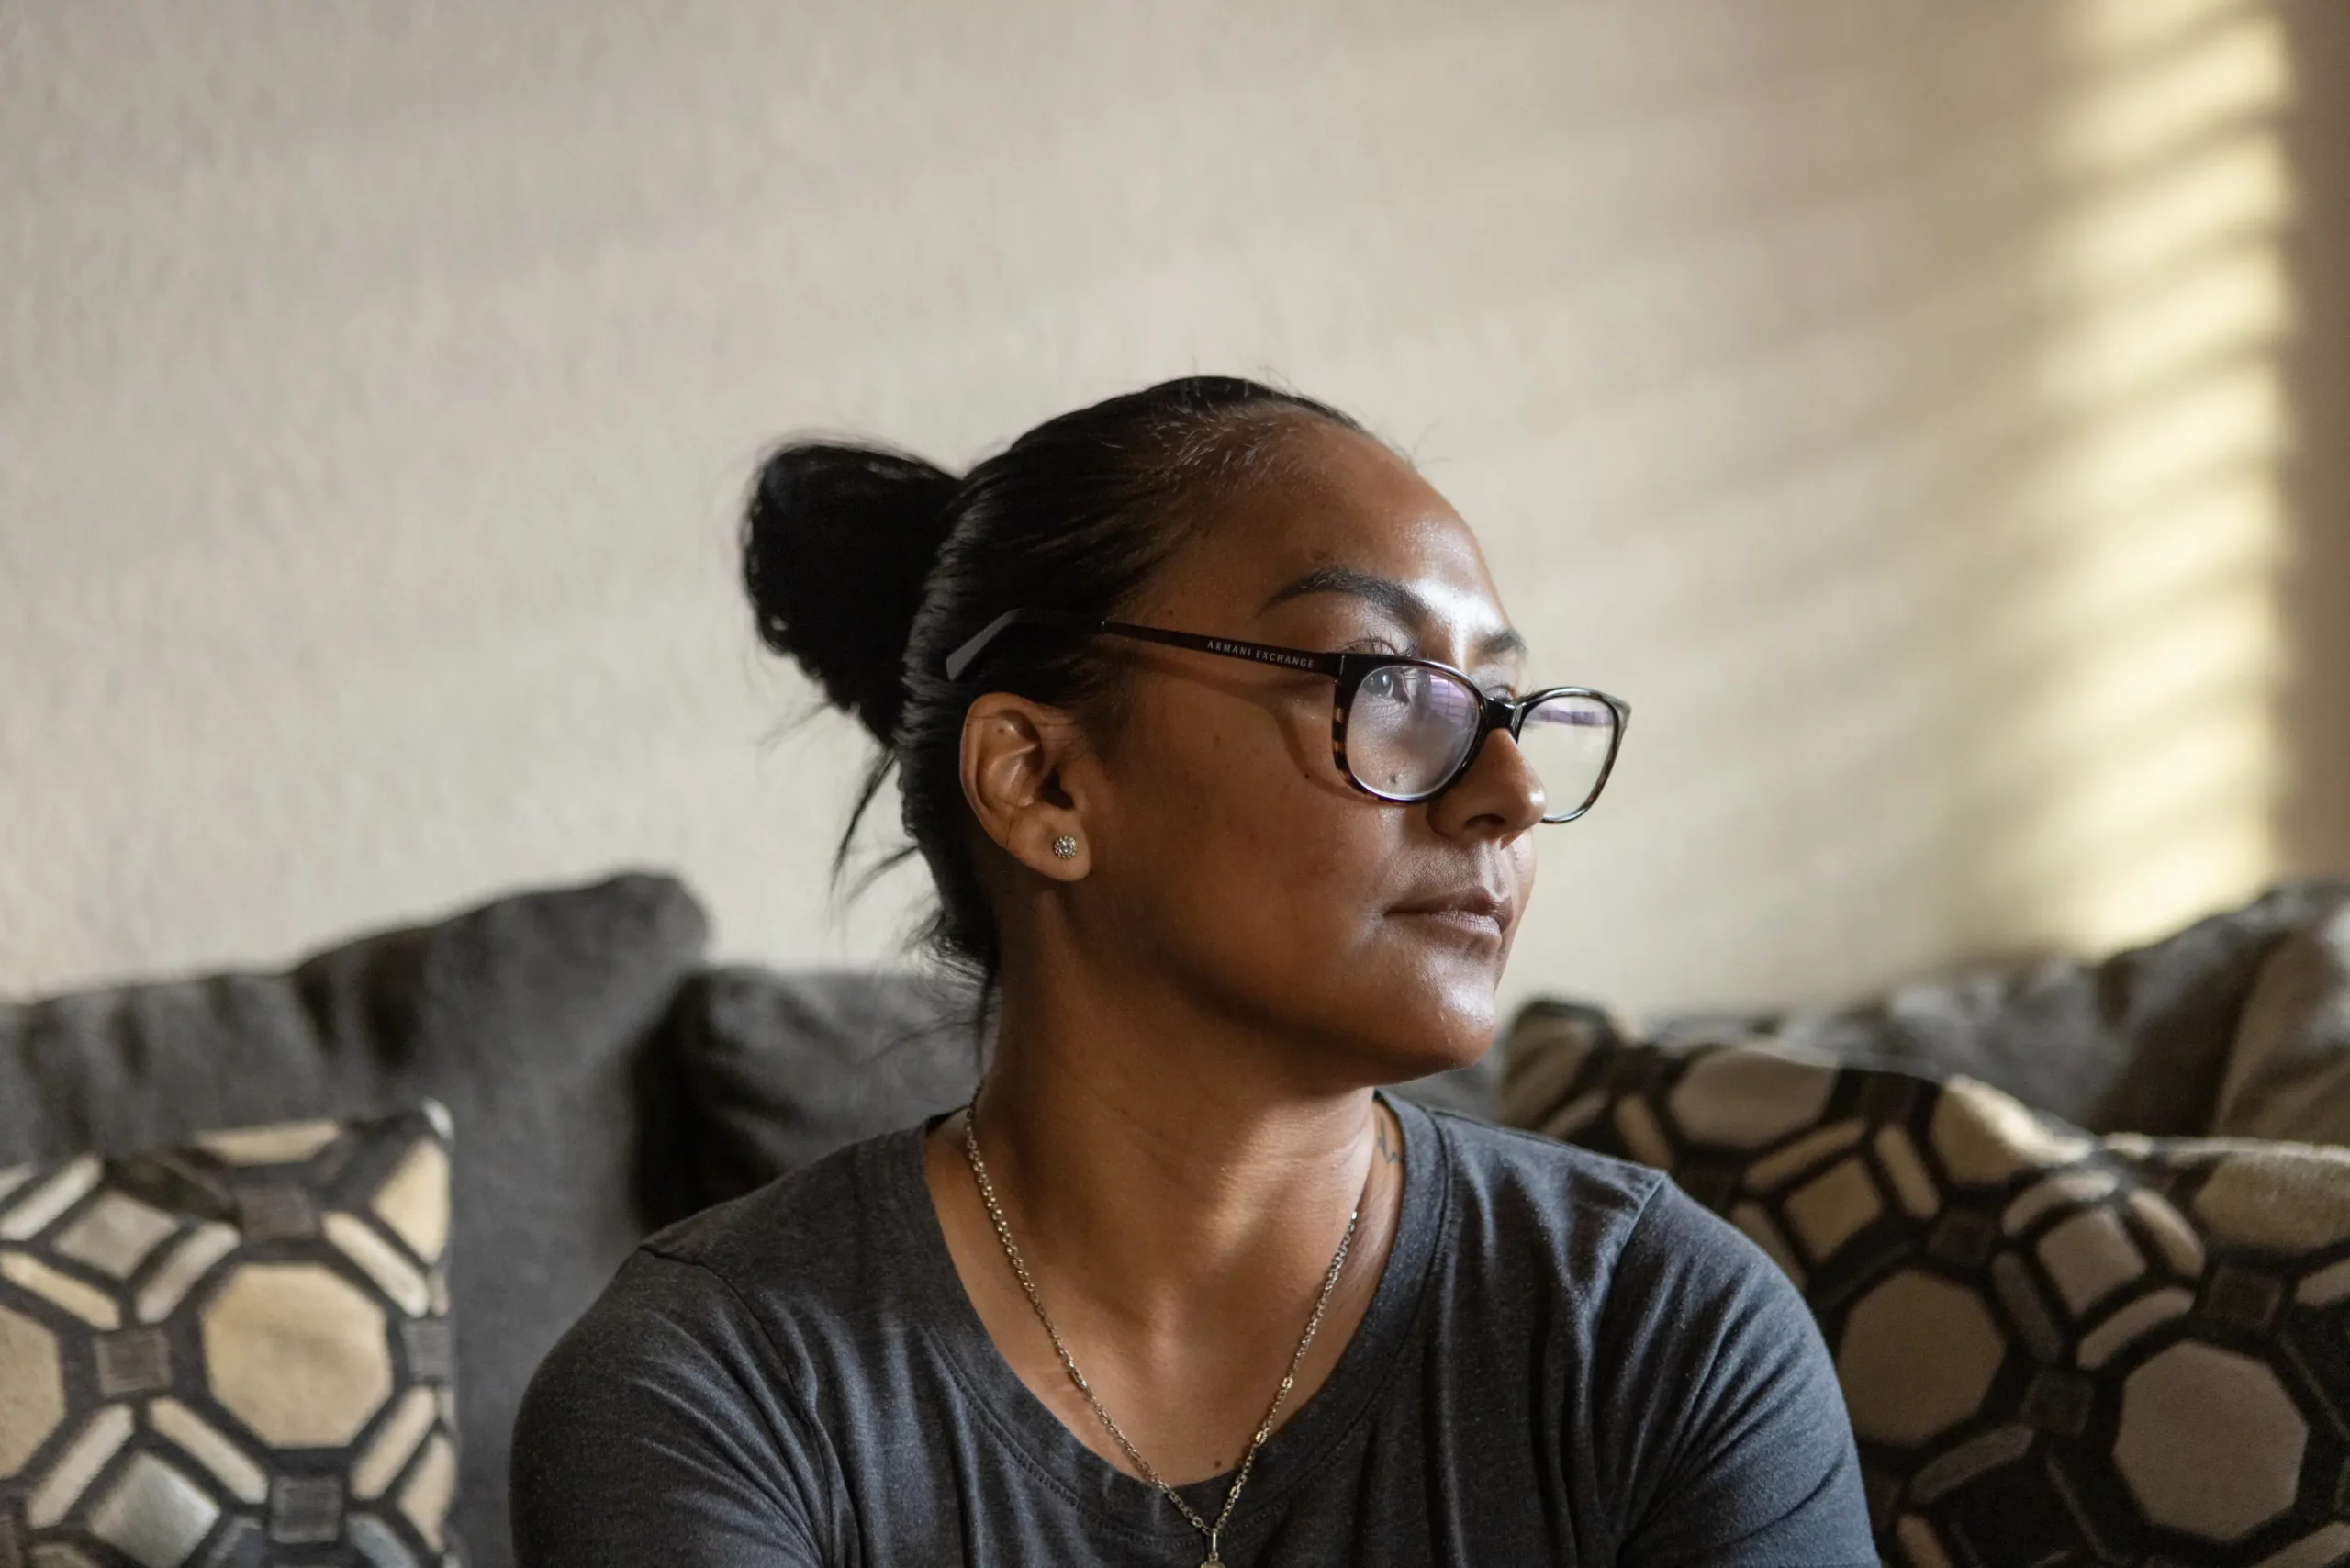 ©Emily Kinskey/The Texas Tribune: Elizabeth Ramirez, mother to three children, sits at home in El Paso. After her eldest child experienced a mental health crisis, Ramirez navigated through the confusing and under-resourced Texas mental health system in search for professional help.